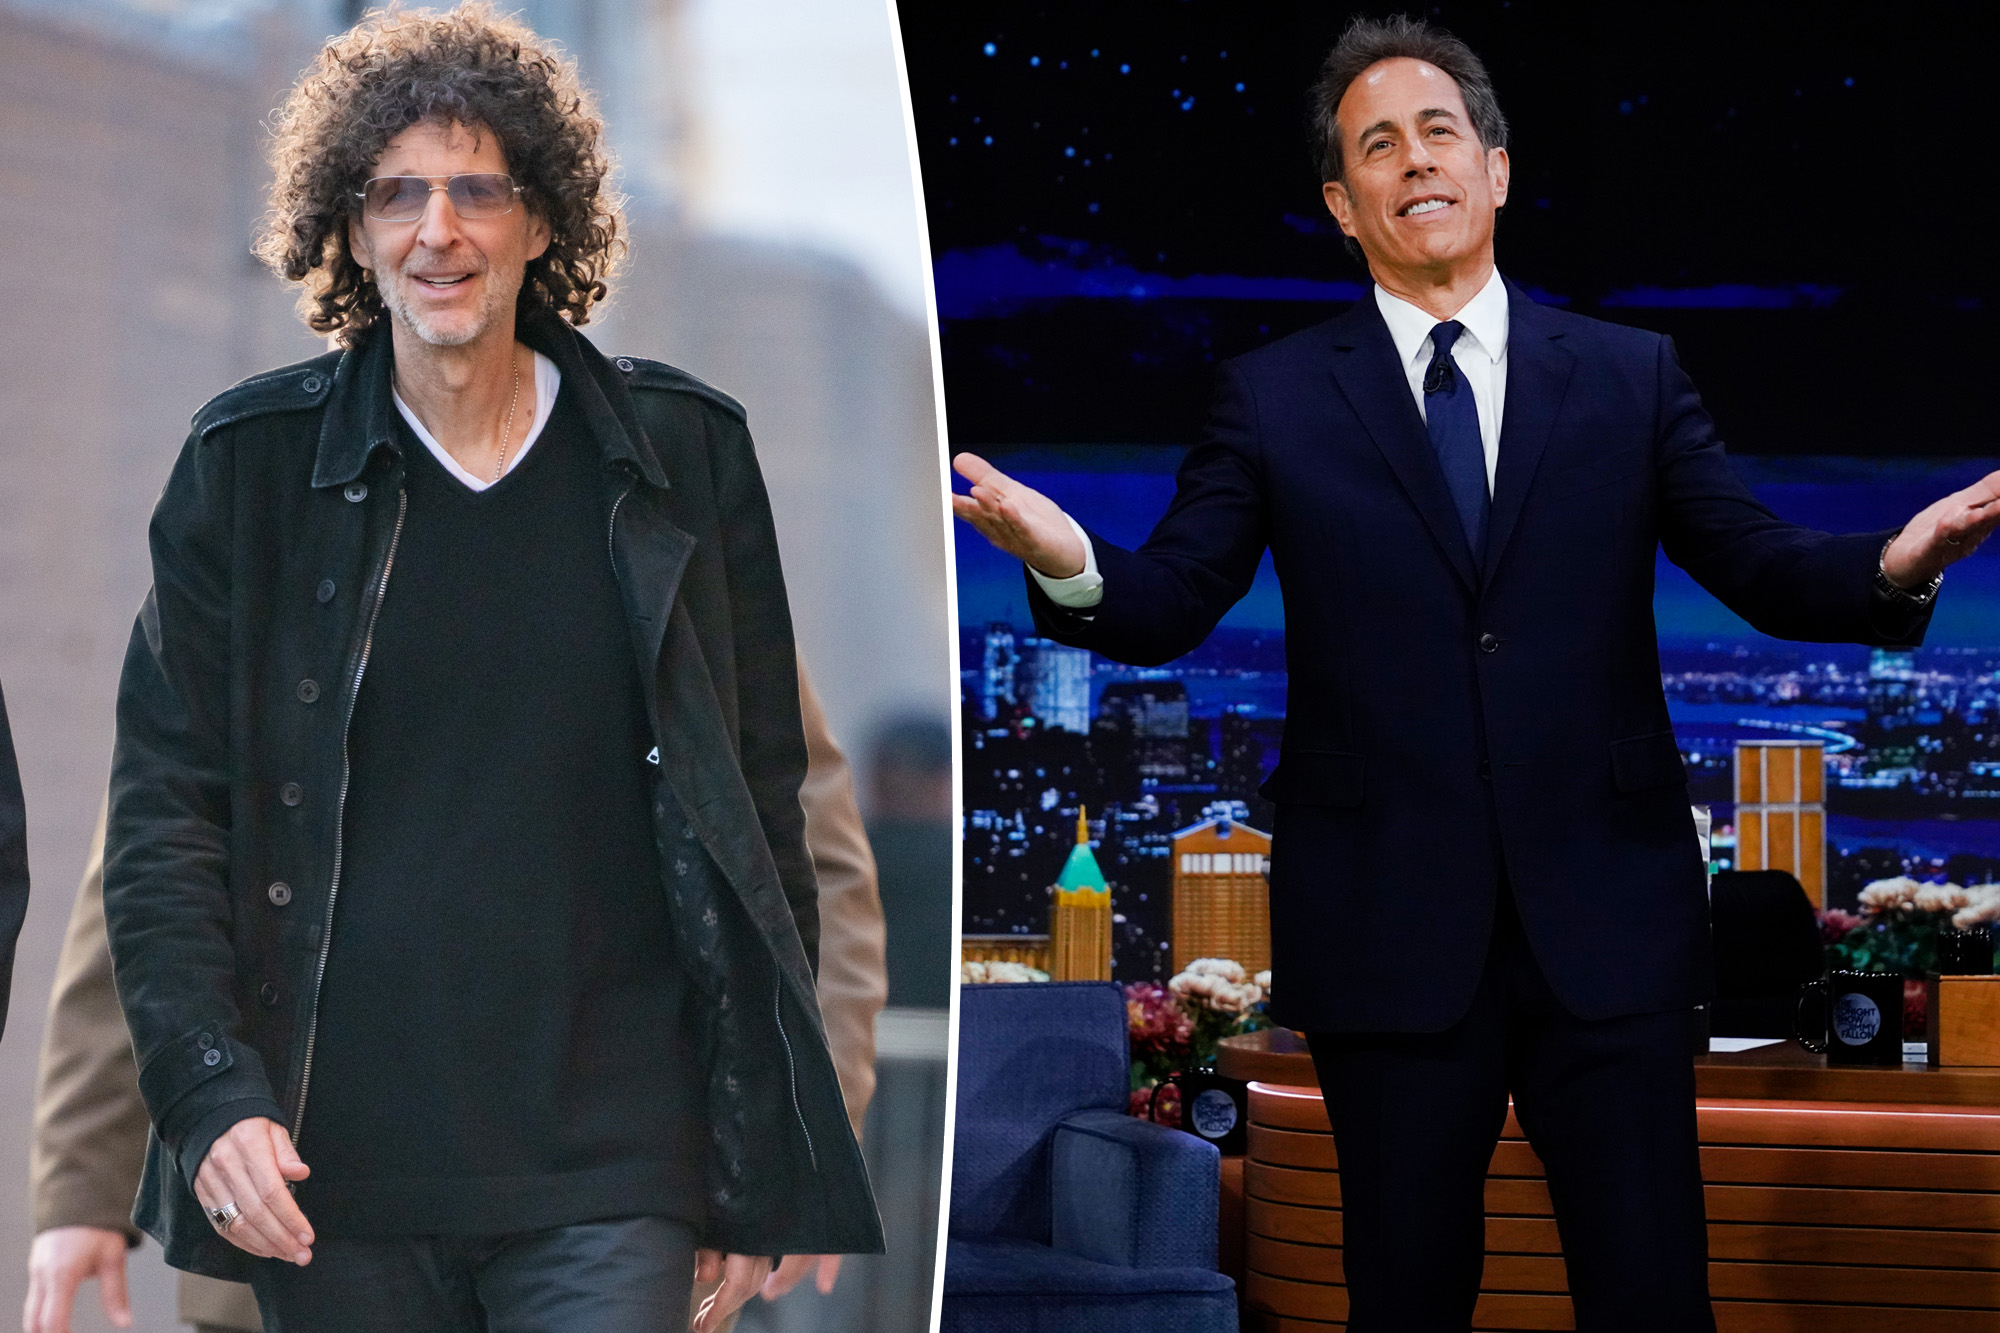 Jerry Seinfeld apologizes to Howard Stern for saying he isn’t funny: ‘Please forgive me’